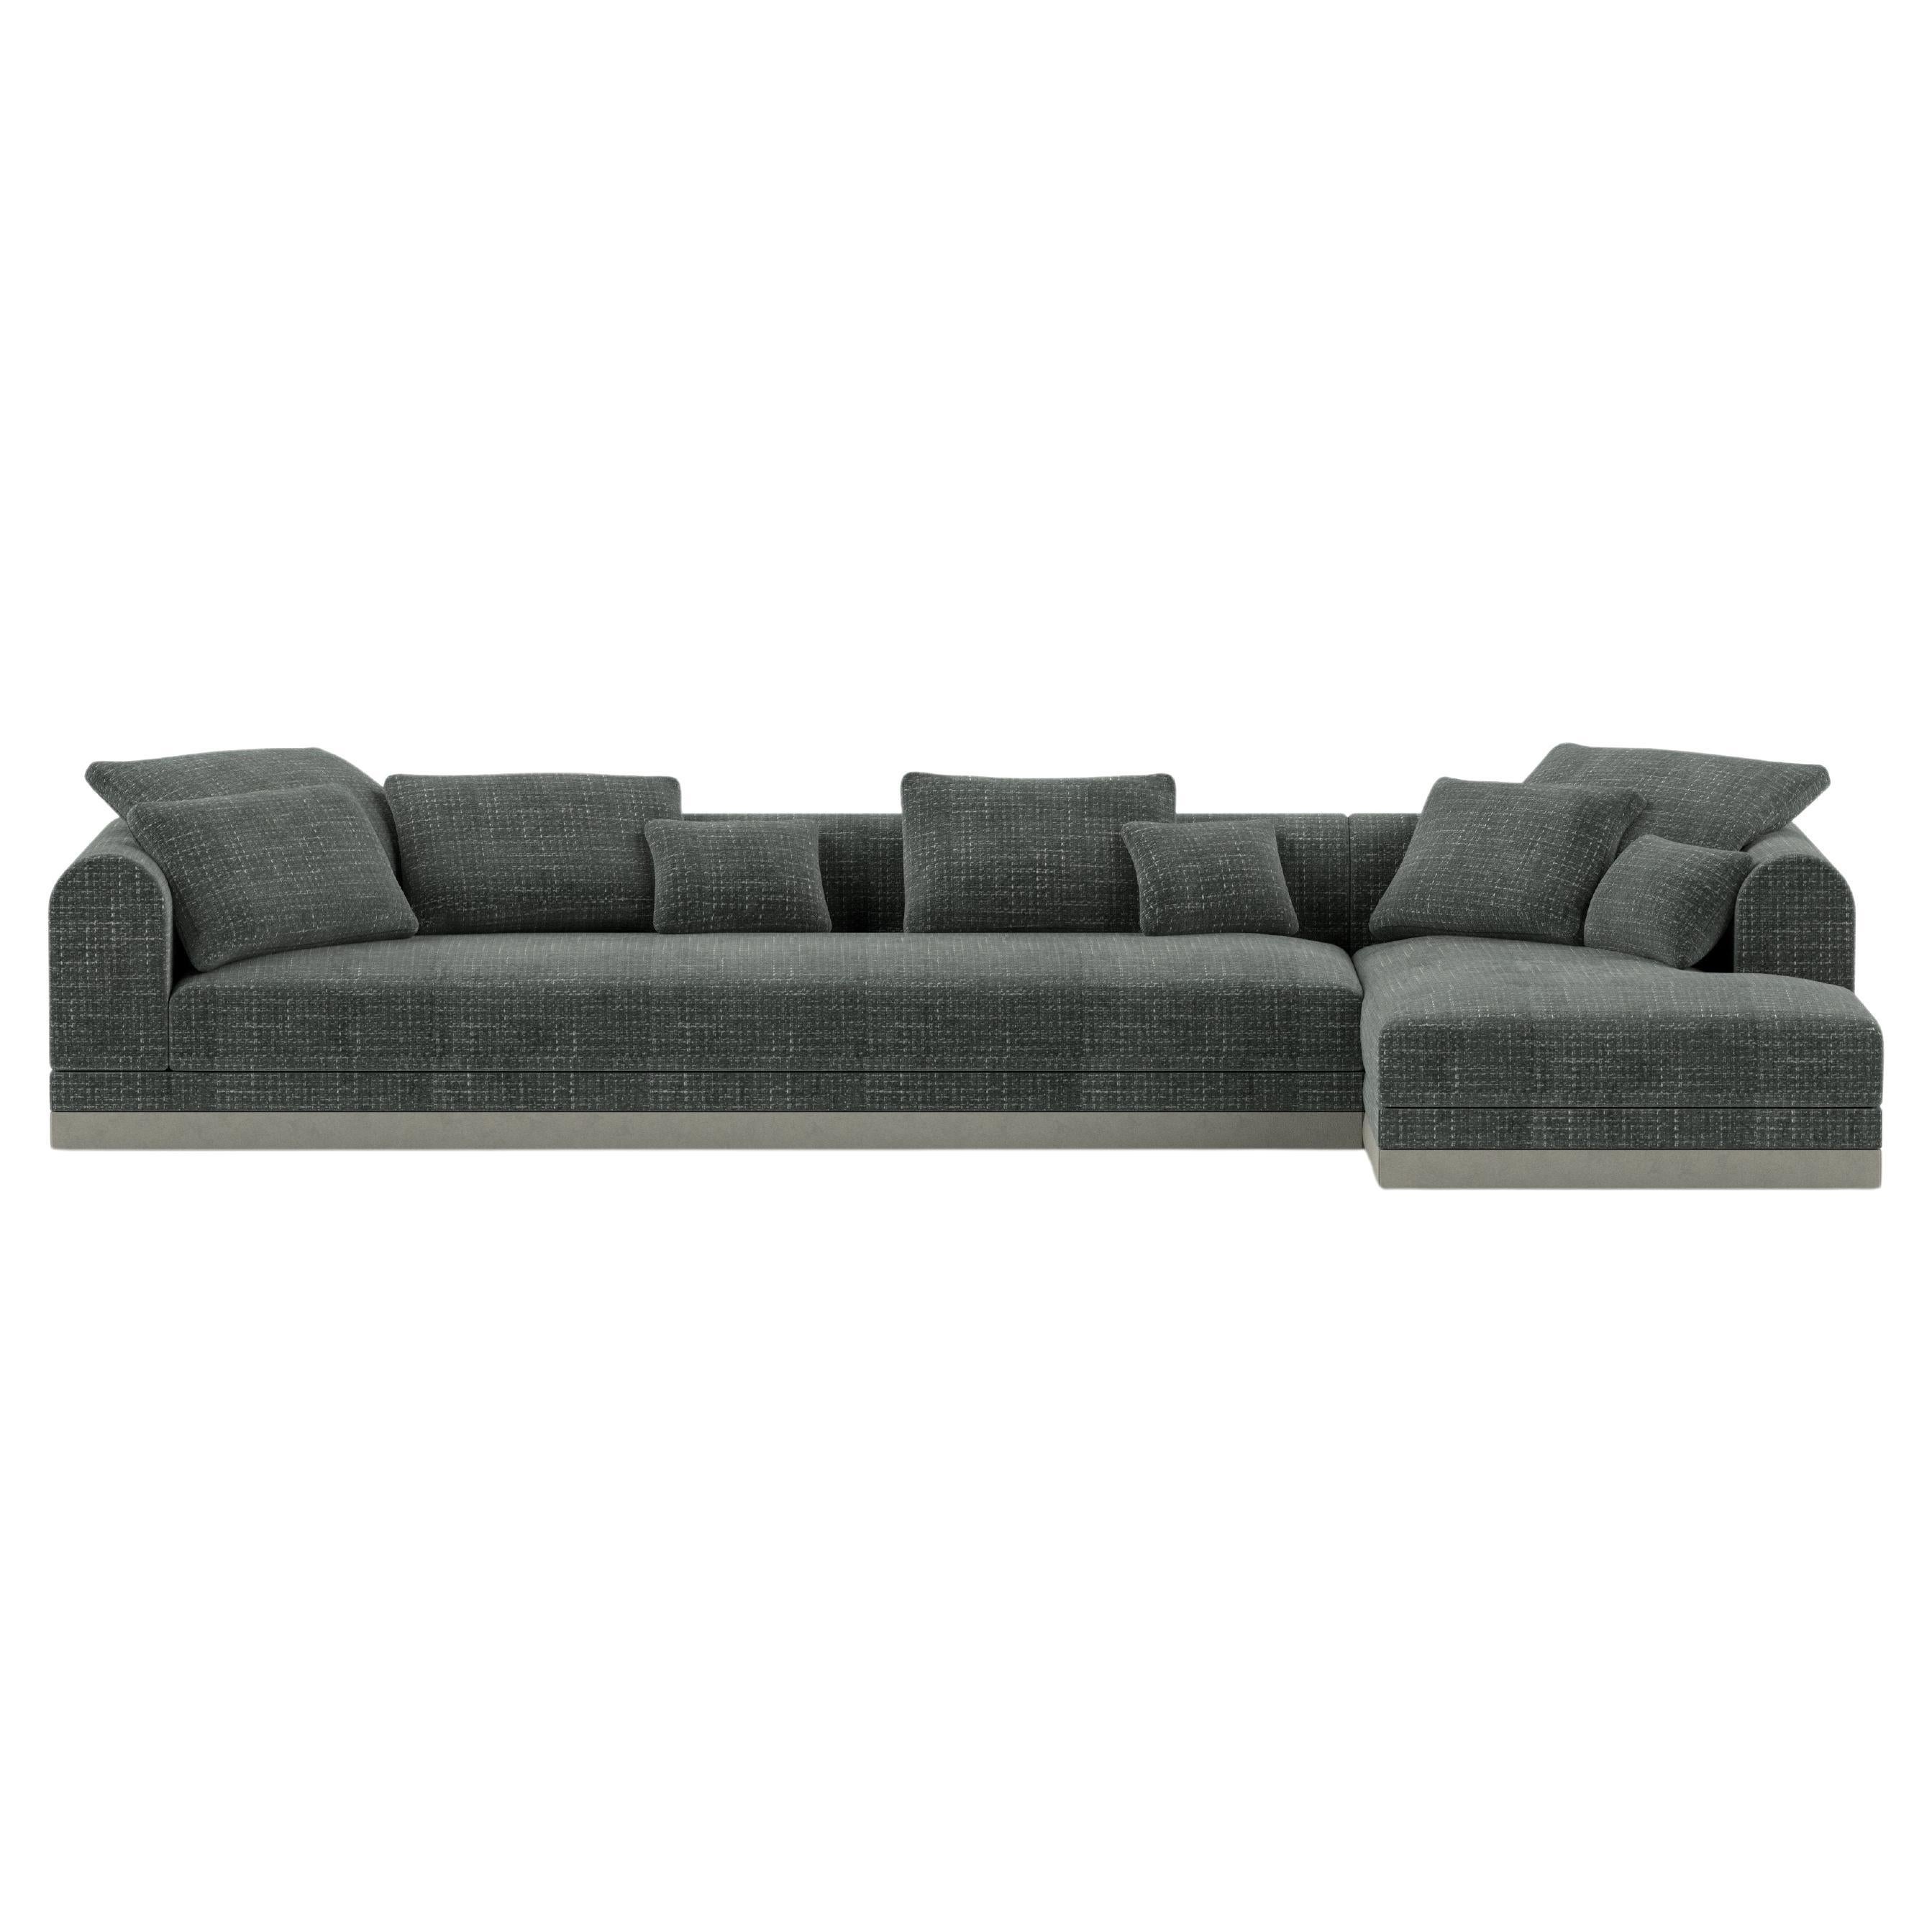 'Aqueduct' Contemporary Sofa by Poiat, Setup 2, Yang 95, Low Plinth For Sale